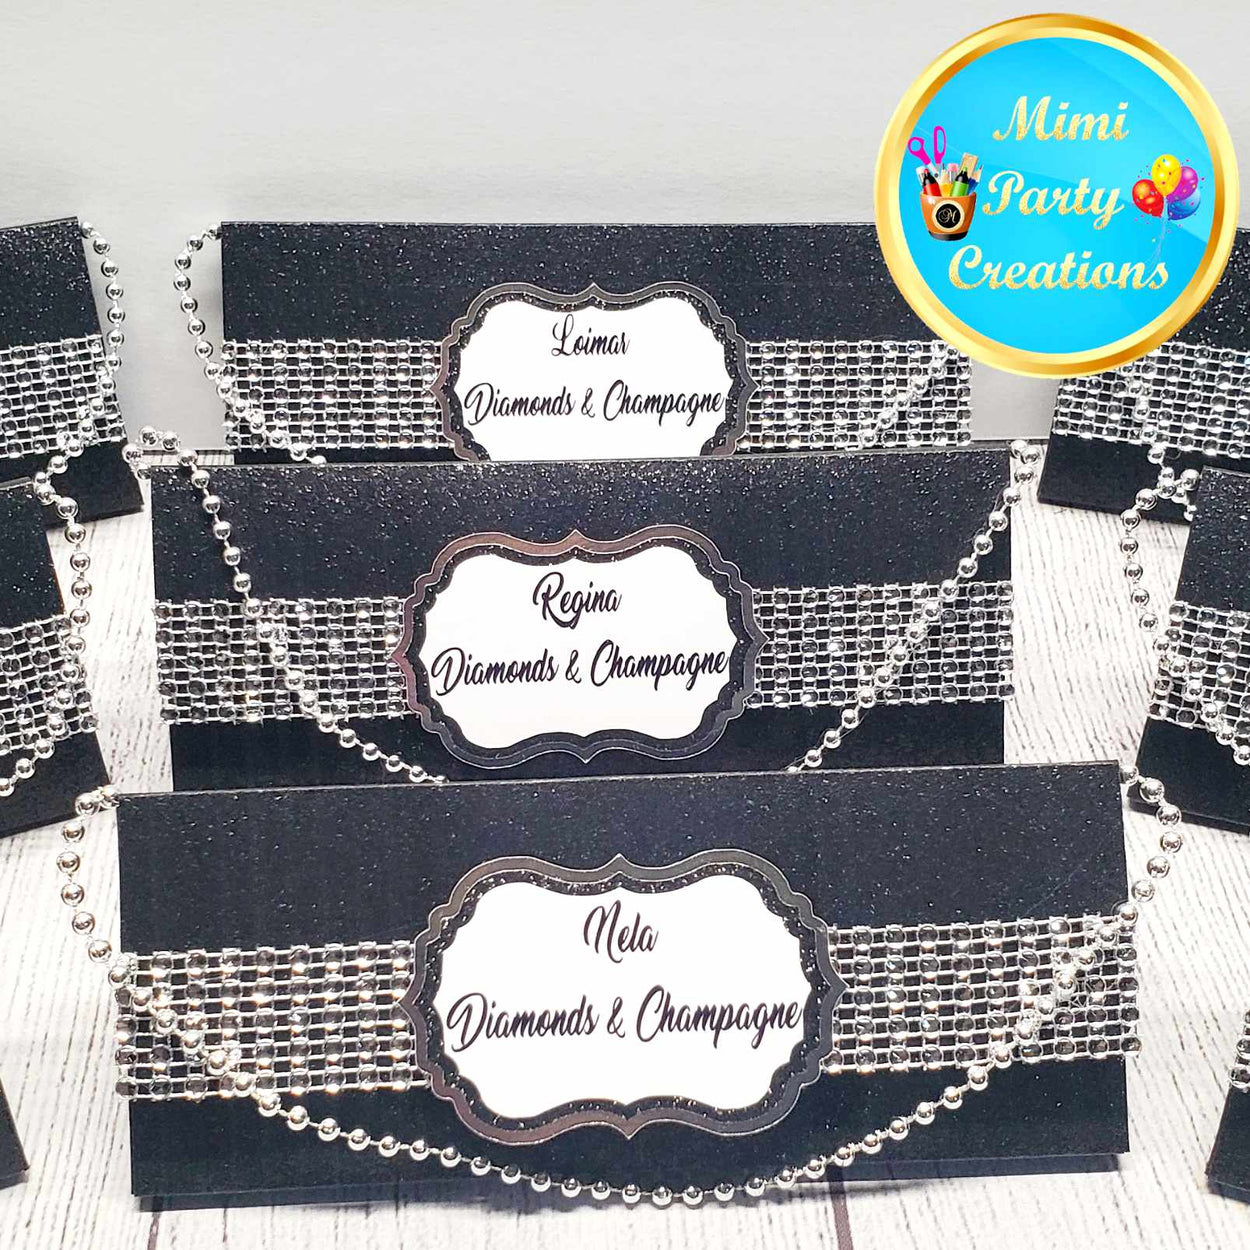 Hershey Bar Purses / Clutch Bag Box Party Favors &amp; Hershey Bar Wrappers